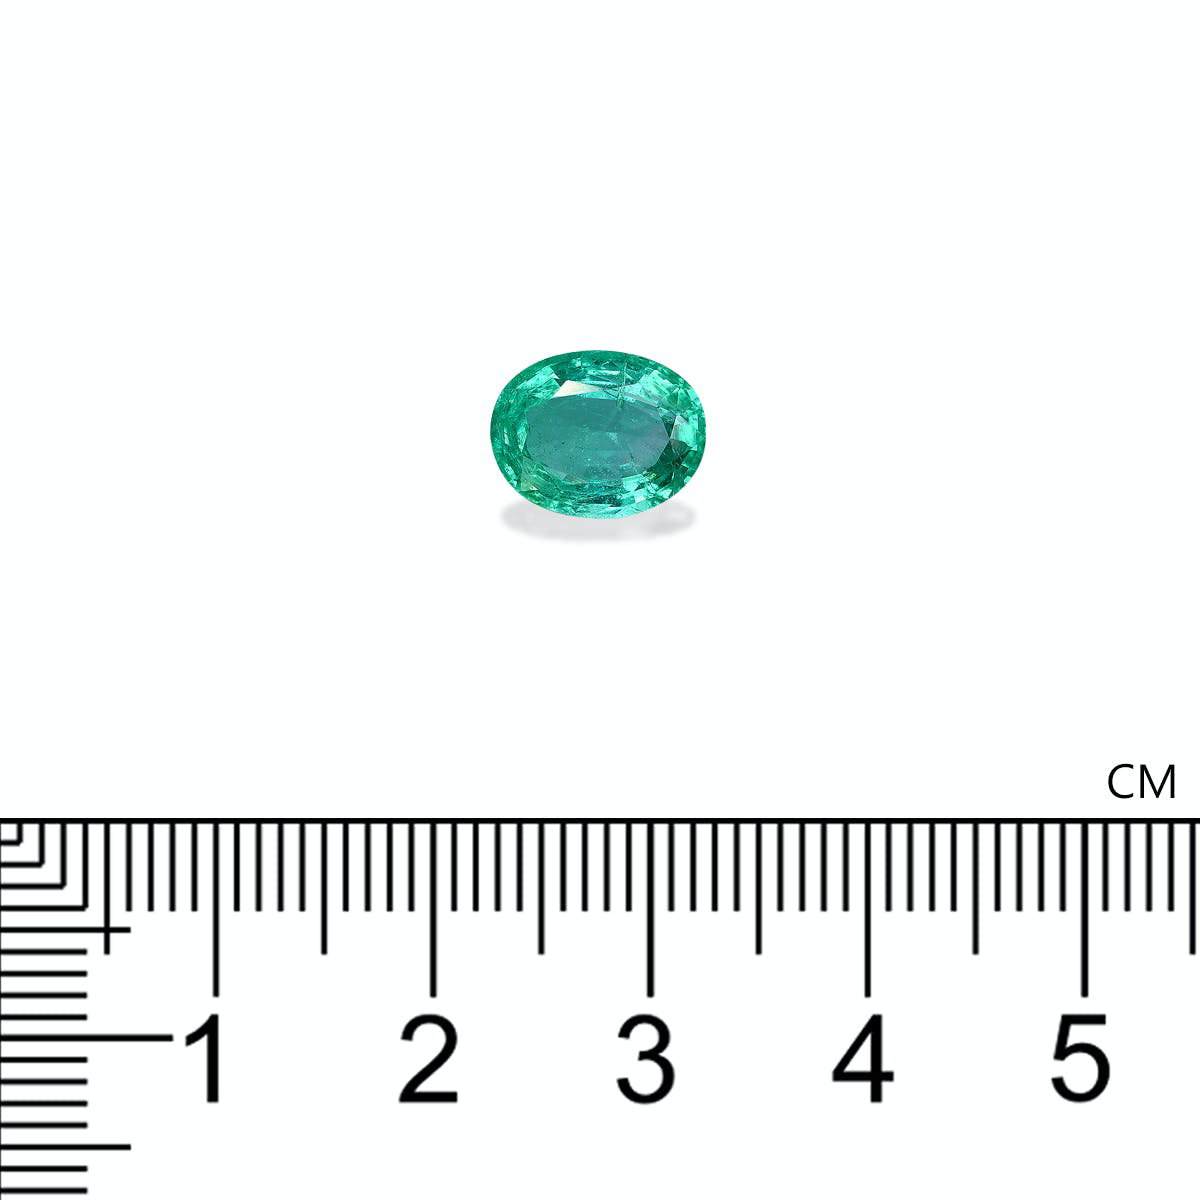 Picture of Green Zambian Emerald 2.47ct (PG0362)